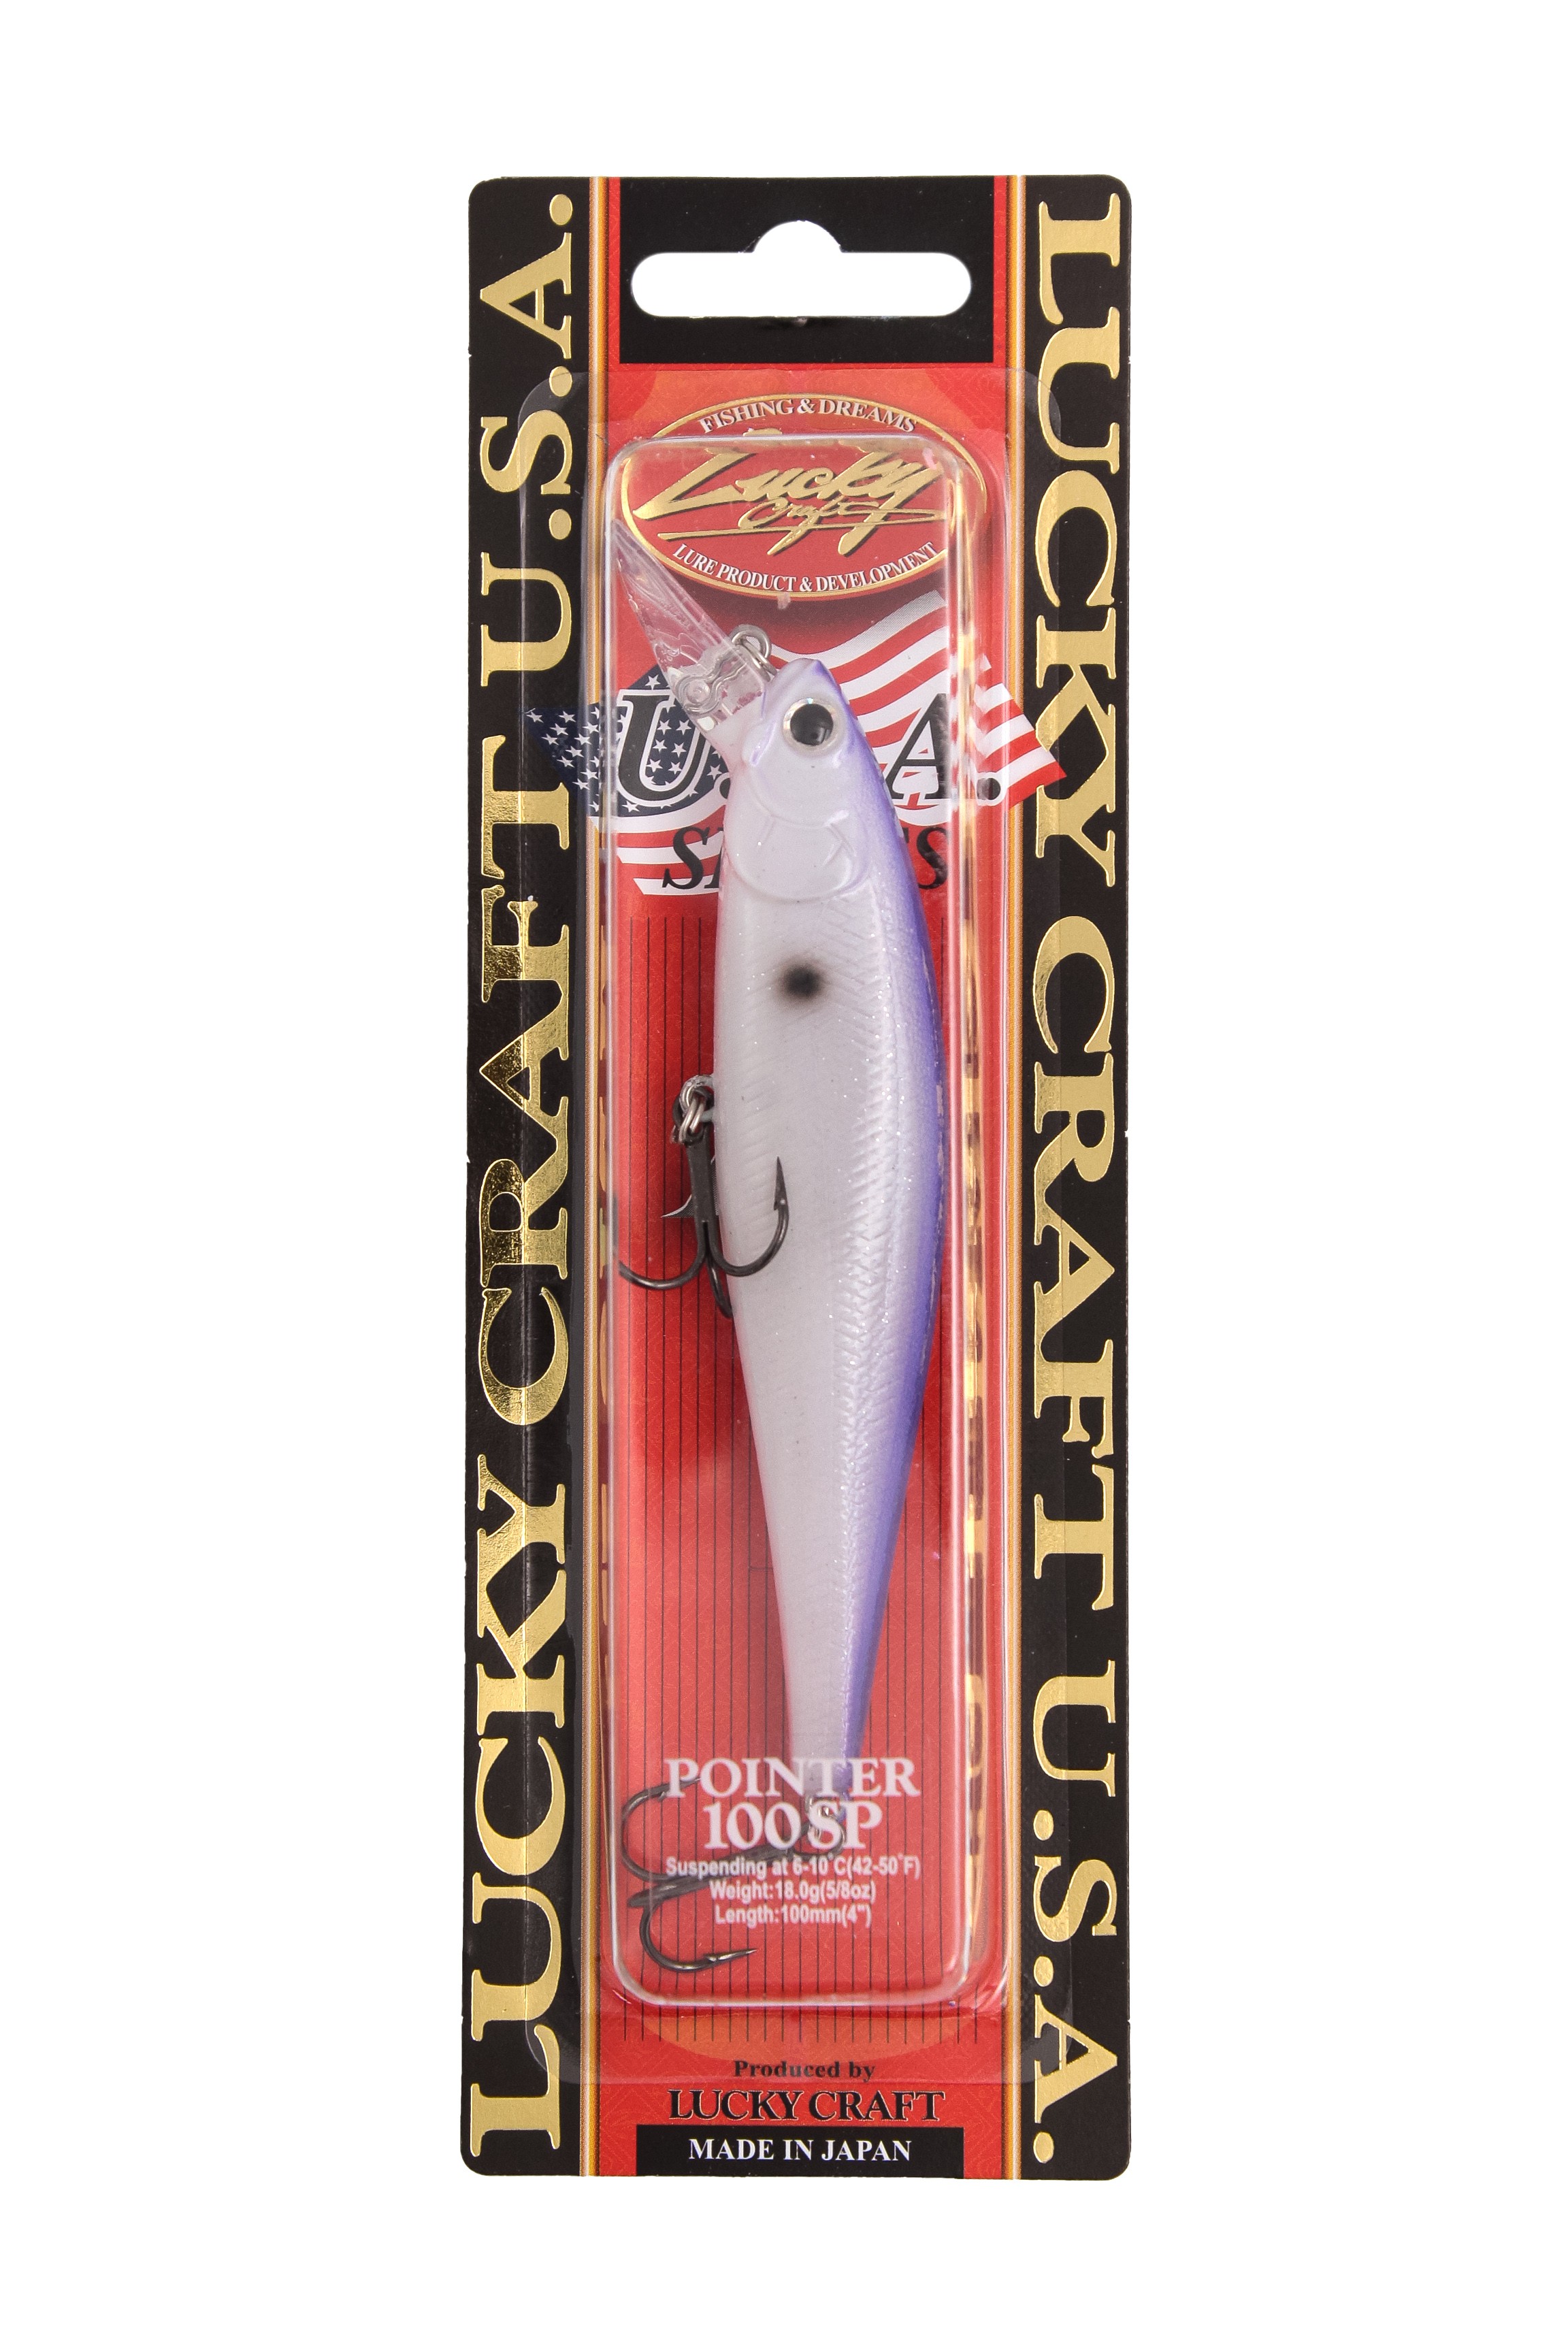 Воблер Lucky Craft Pointer 100 SP 261 Table Rock Shad - фото 1